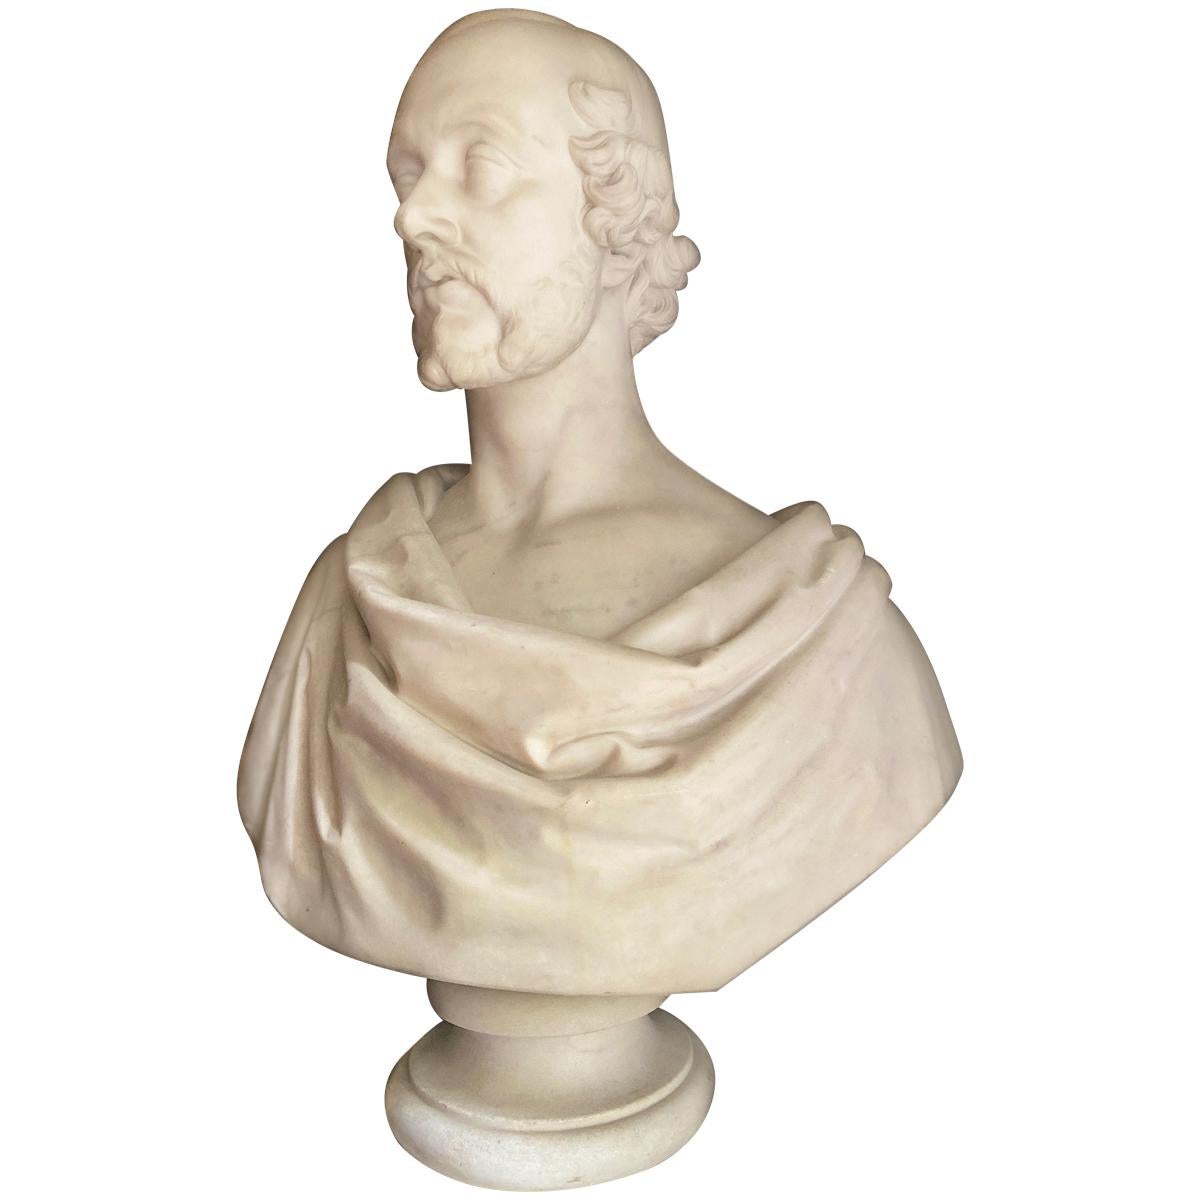 Bust of a Statesman in White Marble, Dated 1852, Signed Christopher Moore